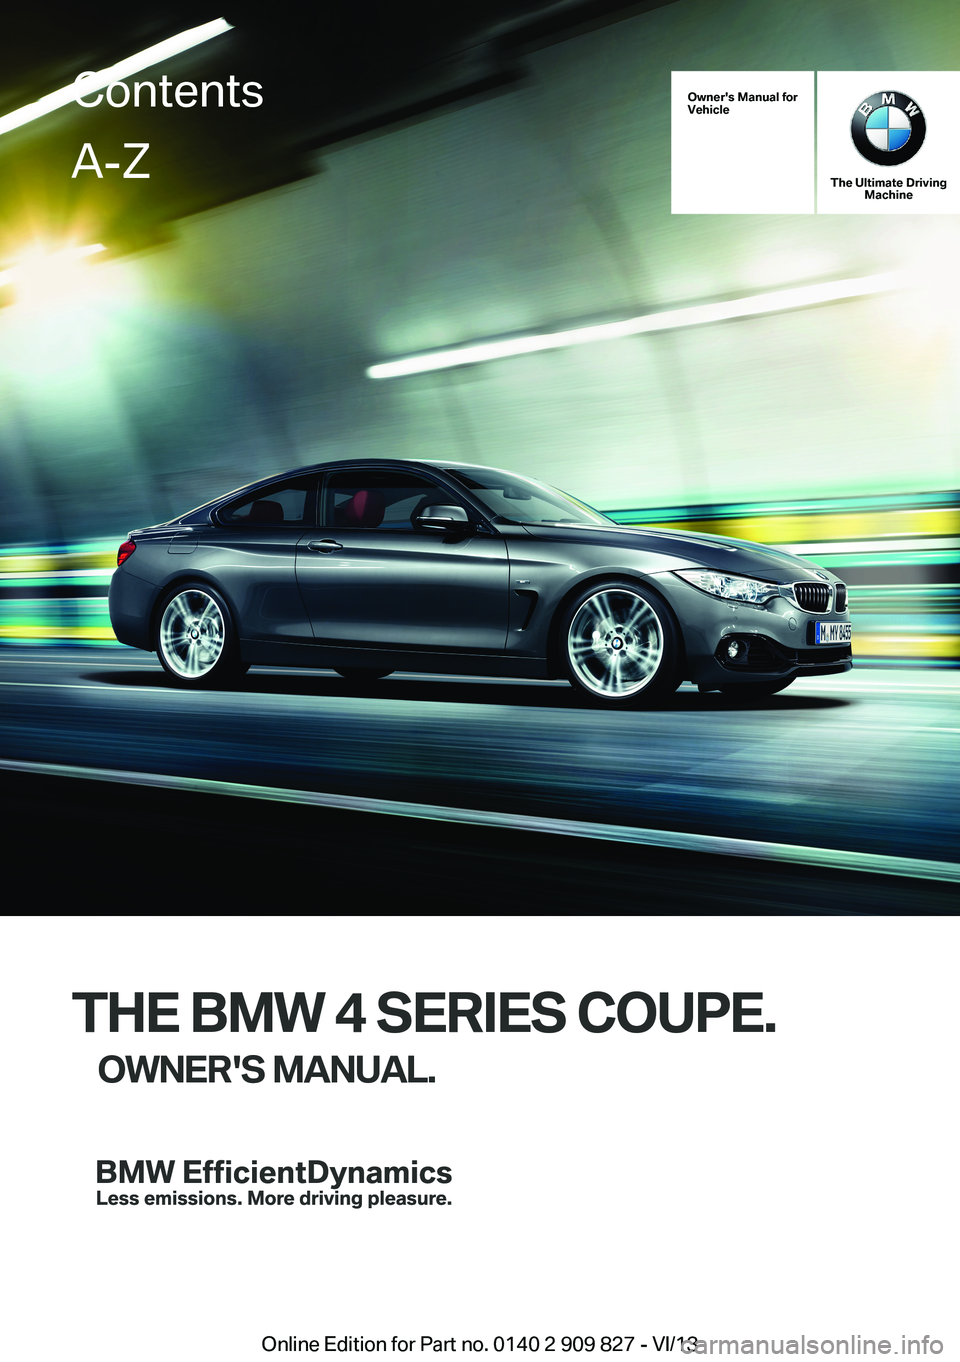 BMW 428I XDRIVE COUPE 2014  Owners Manual Owner's Manual forVehicle
The Ultimate DrivingMachine
THE BMW 4 SERIES COUPE.
OWNER'S MANUAL.ContentsA-Z
Online Edition for Part no. 0140 2 909 827 - VI/13   